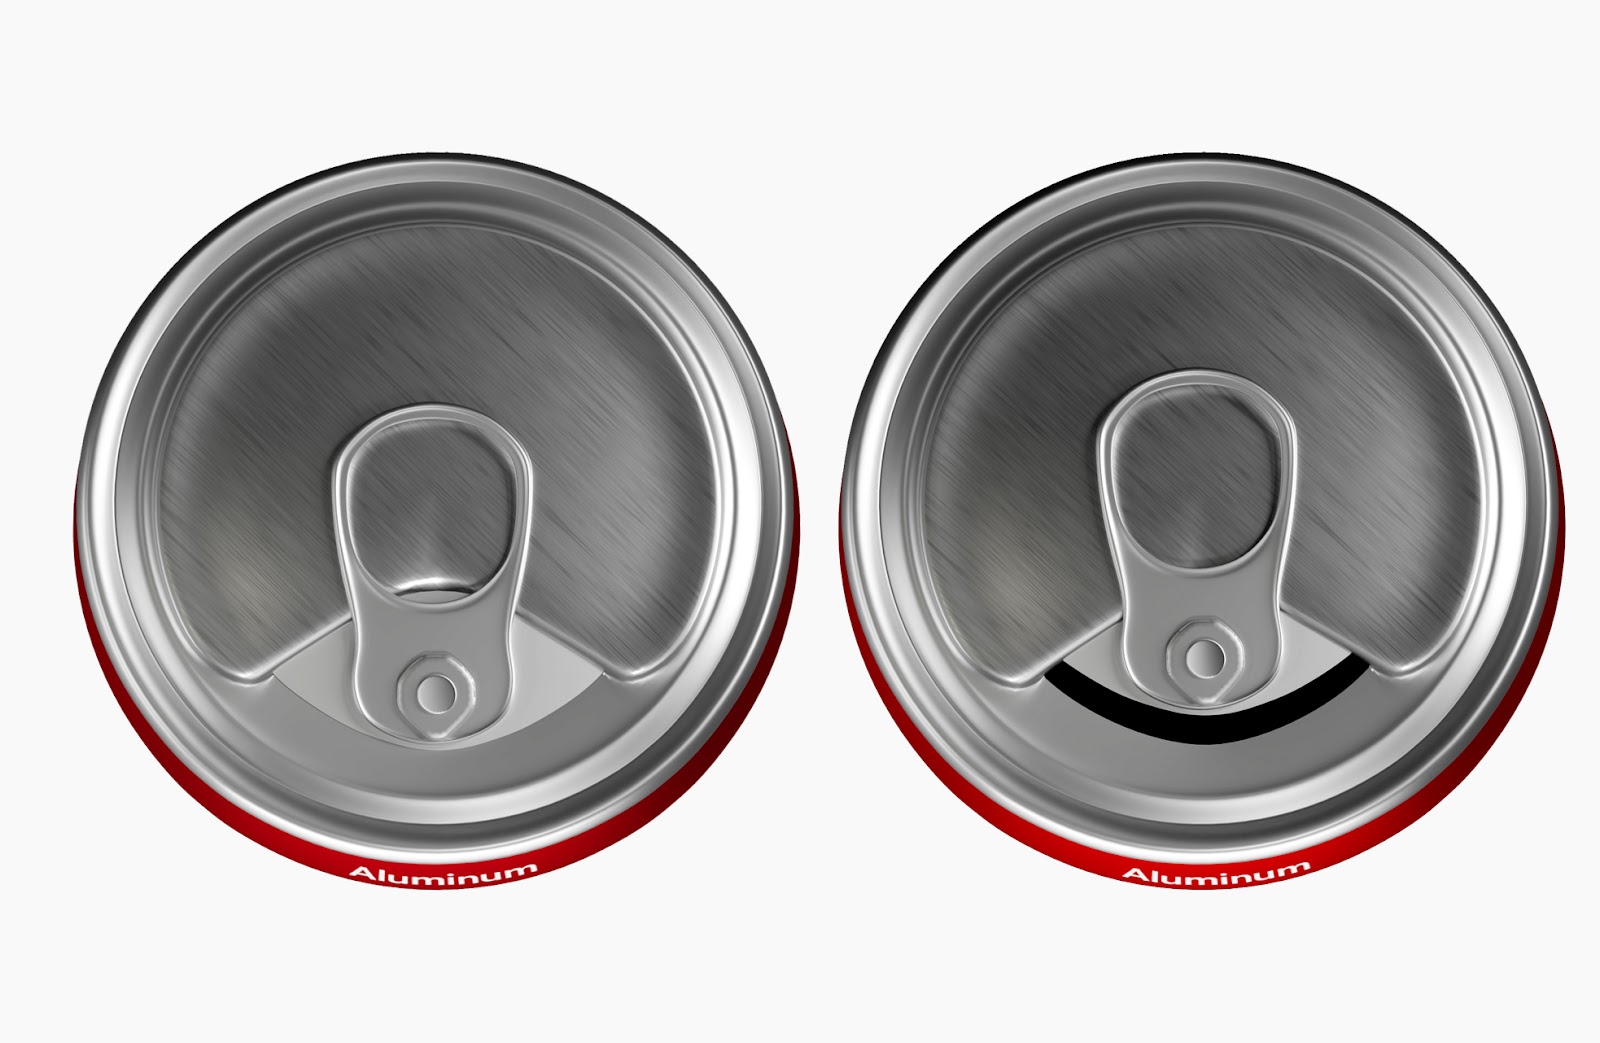 The Next Generation of the Aluminum Can!